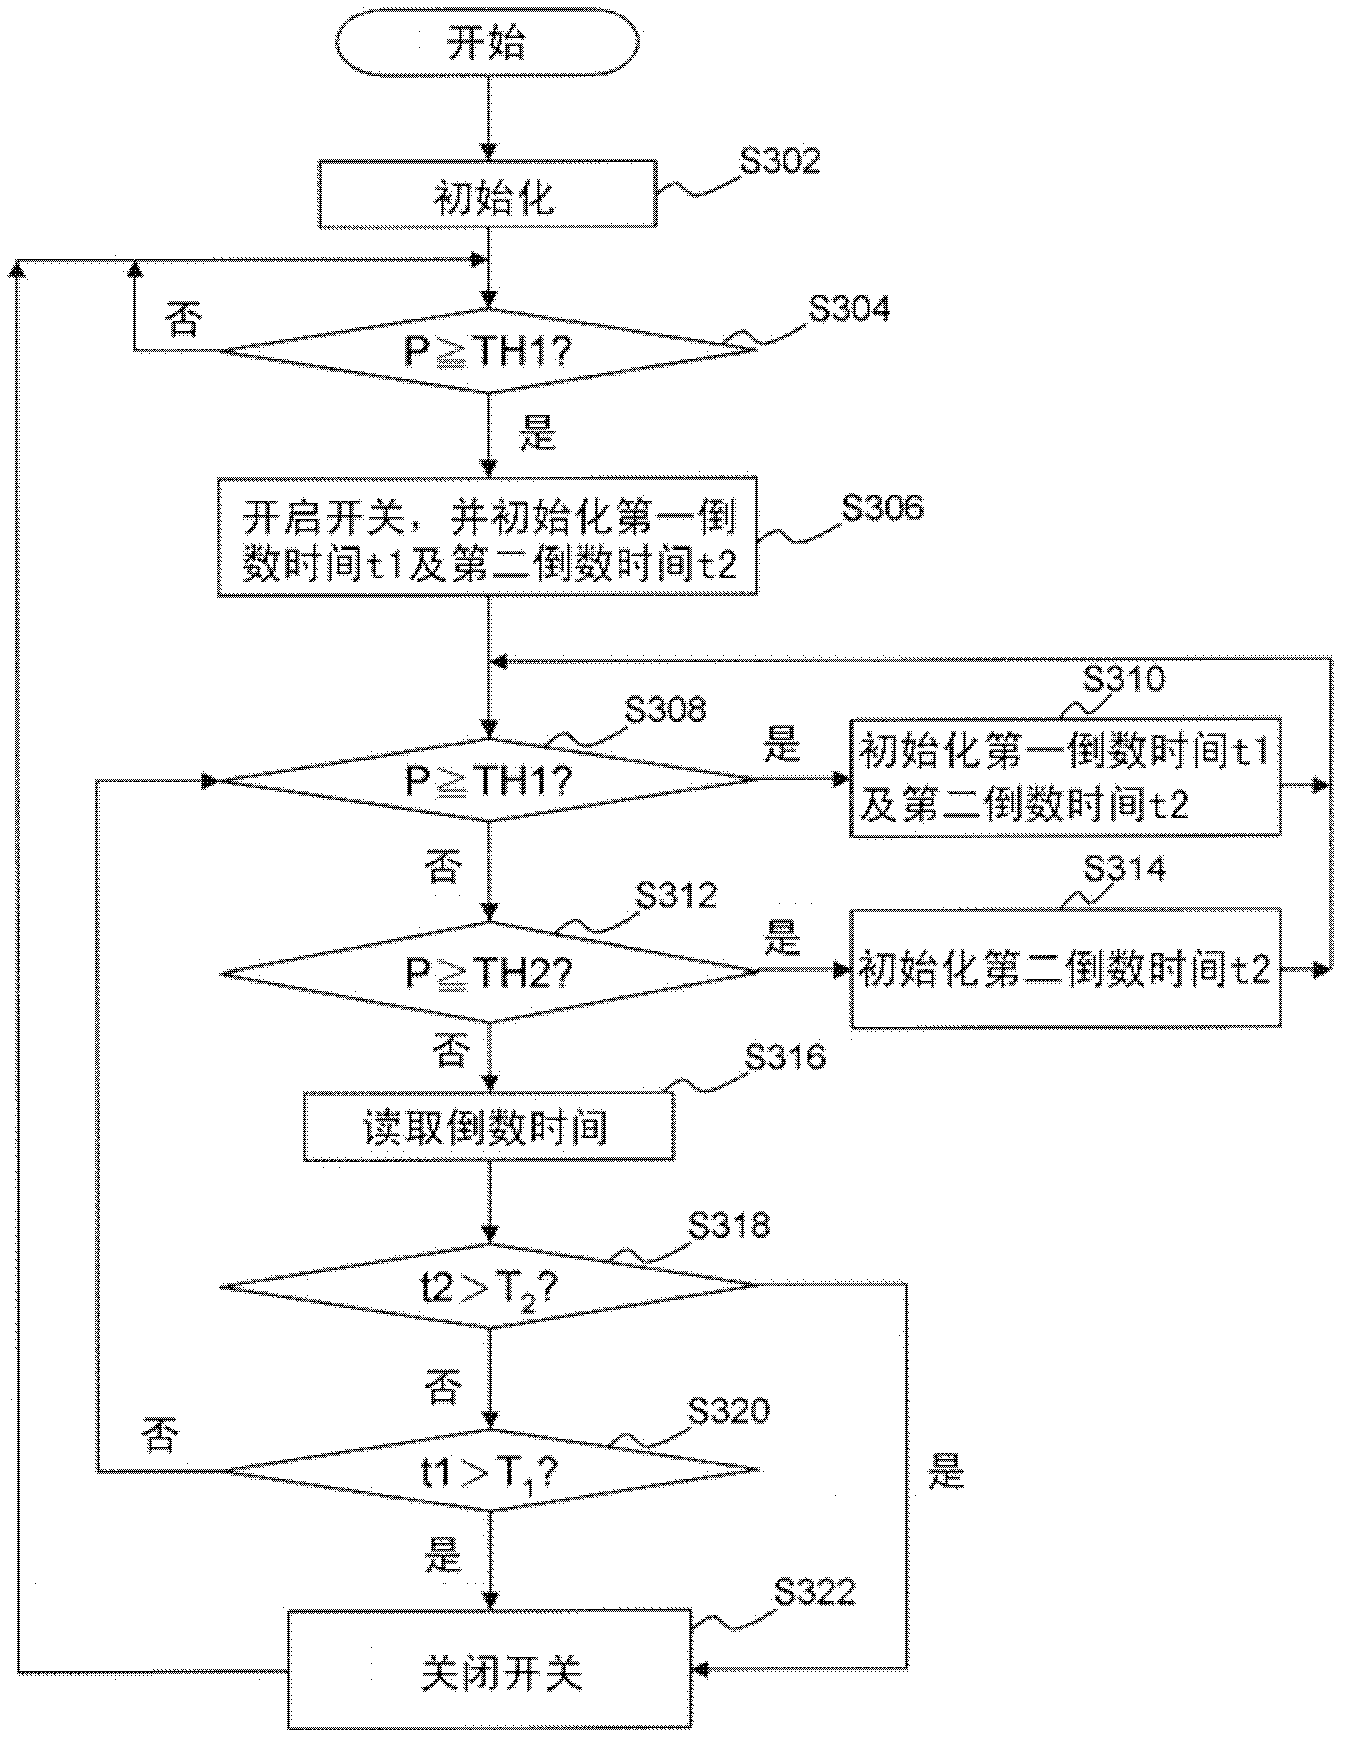 Method for controlling switch